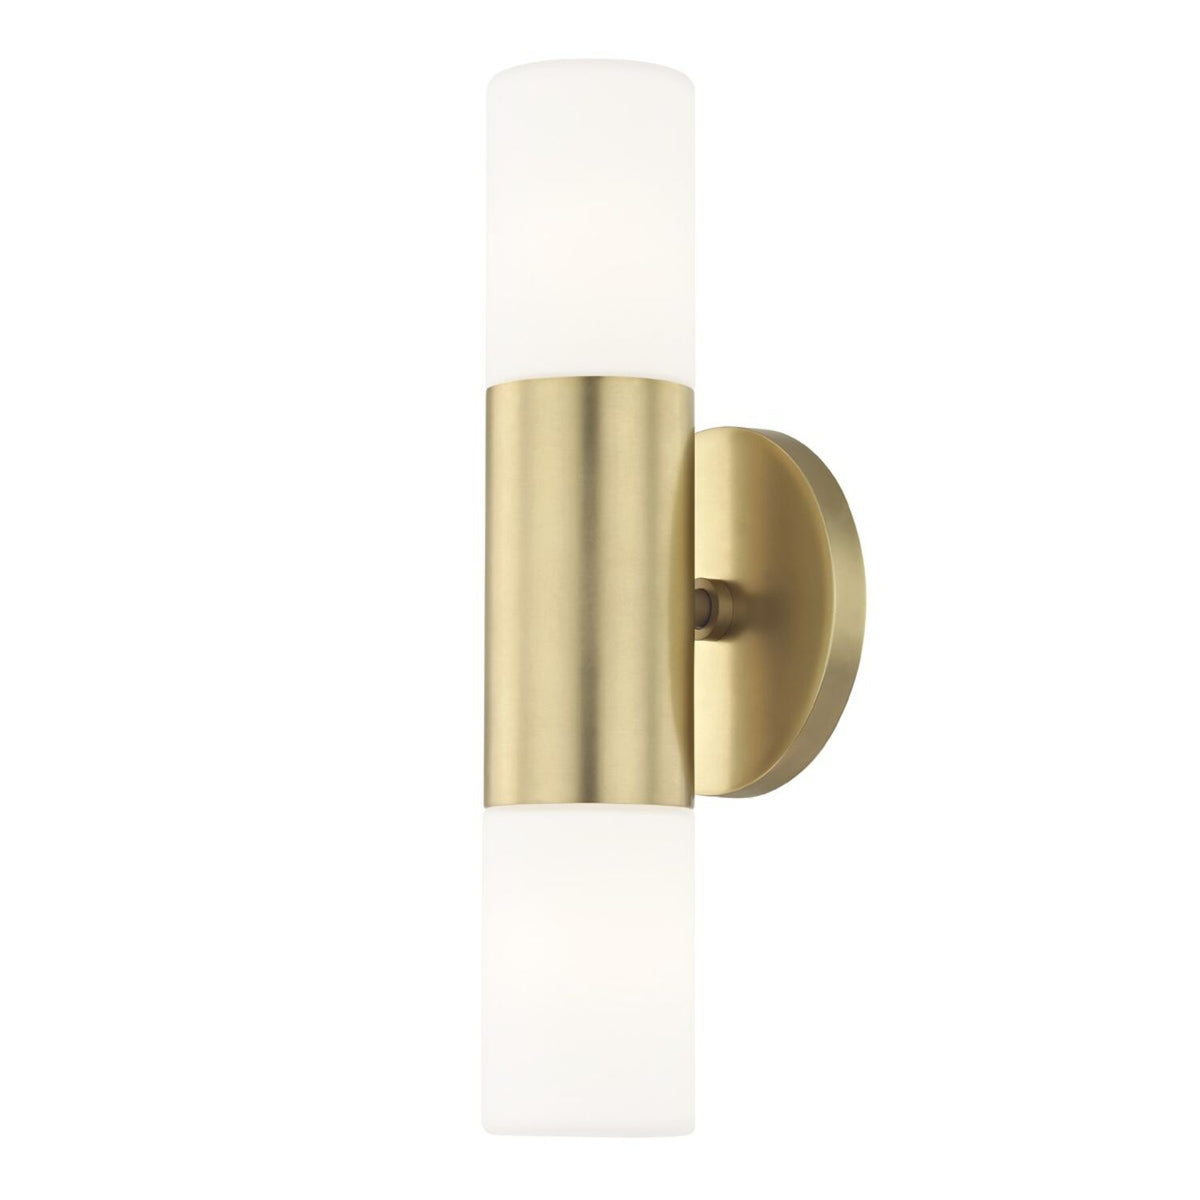 Lola Wall Sconce - Aged Brass